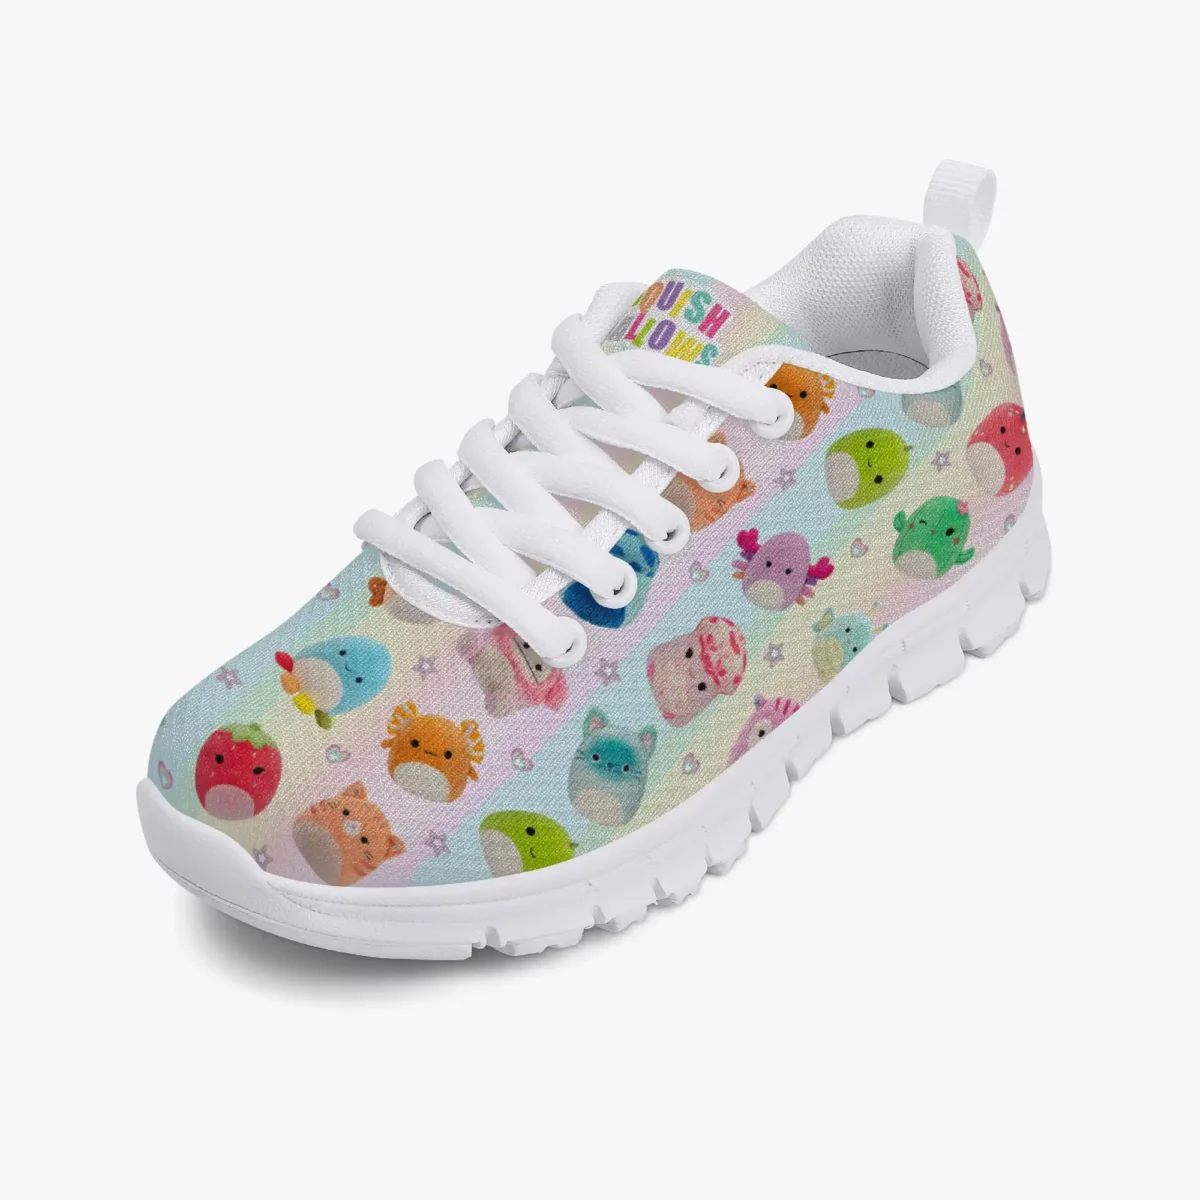 Personalized Squishmallows shoes for Kids’ Lightweight Mesh Sneakers Cool Kiddo 18